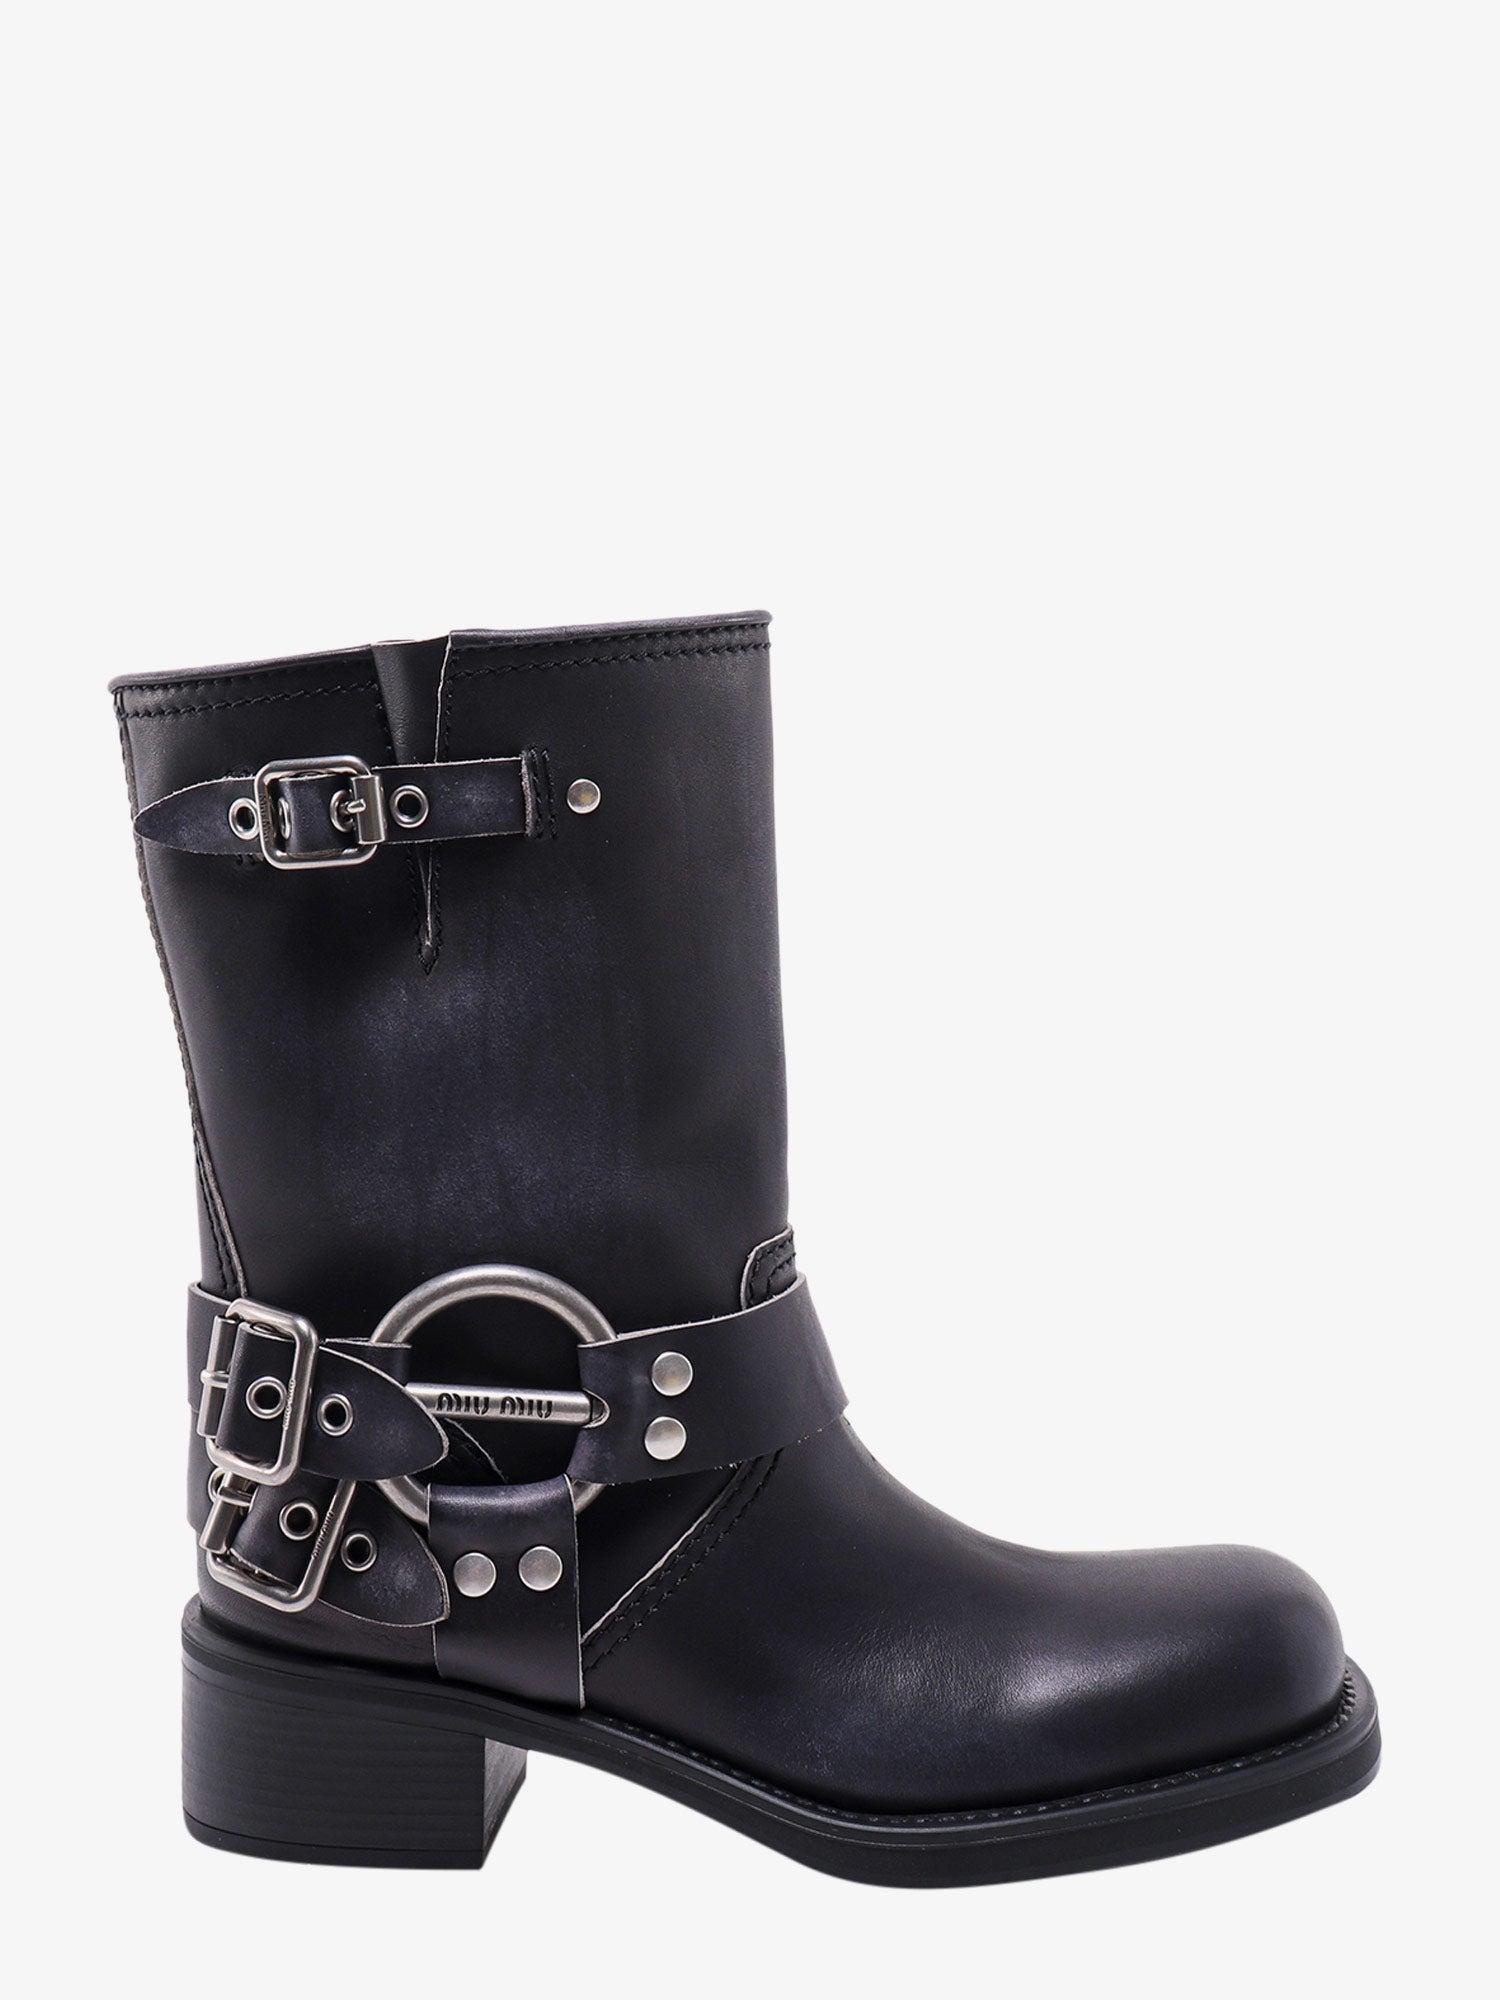 Miu Miu Squared Toe Leather Ankle Strap Boots in Black | Lyst